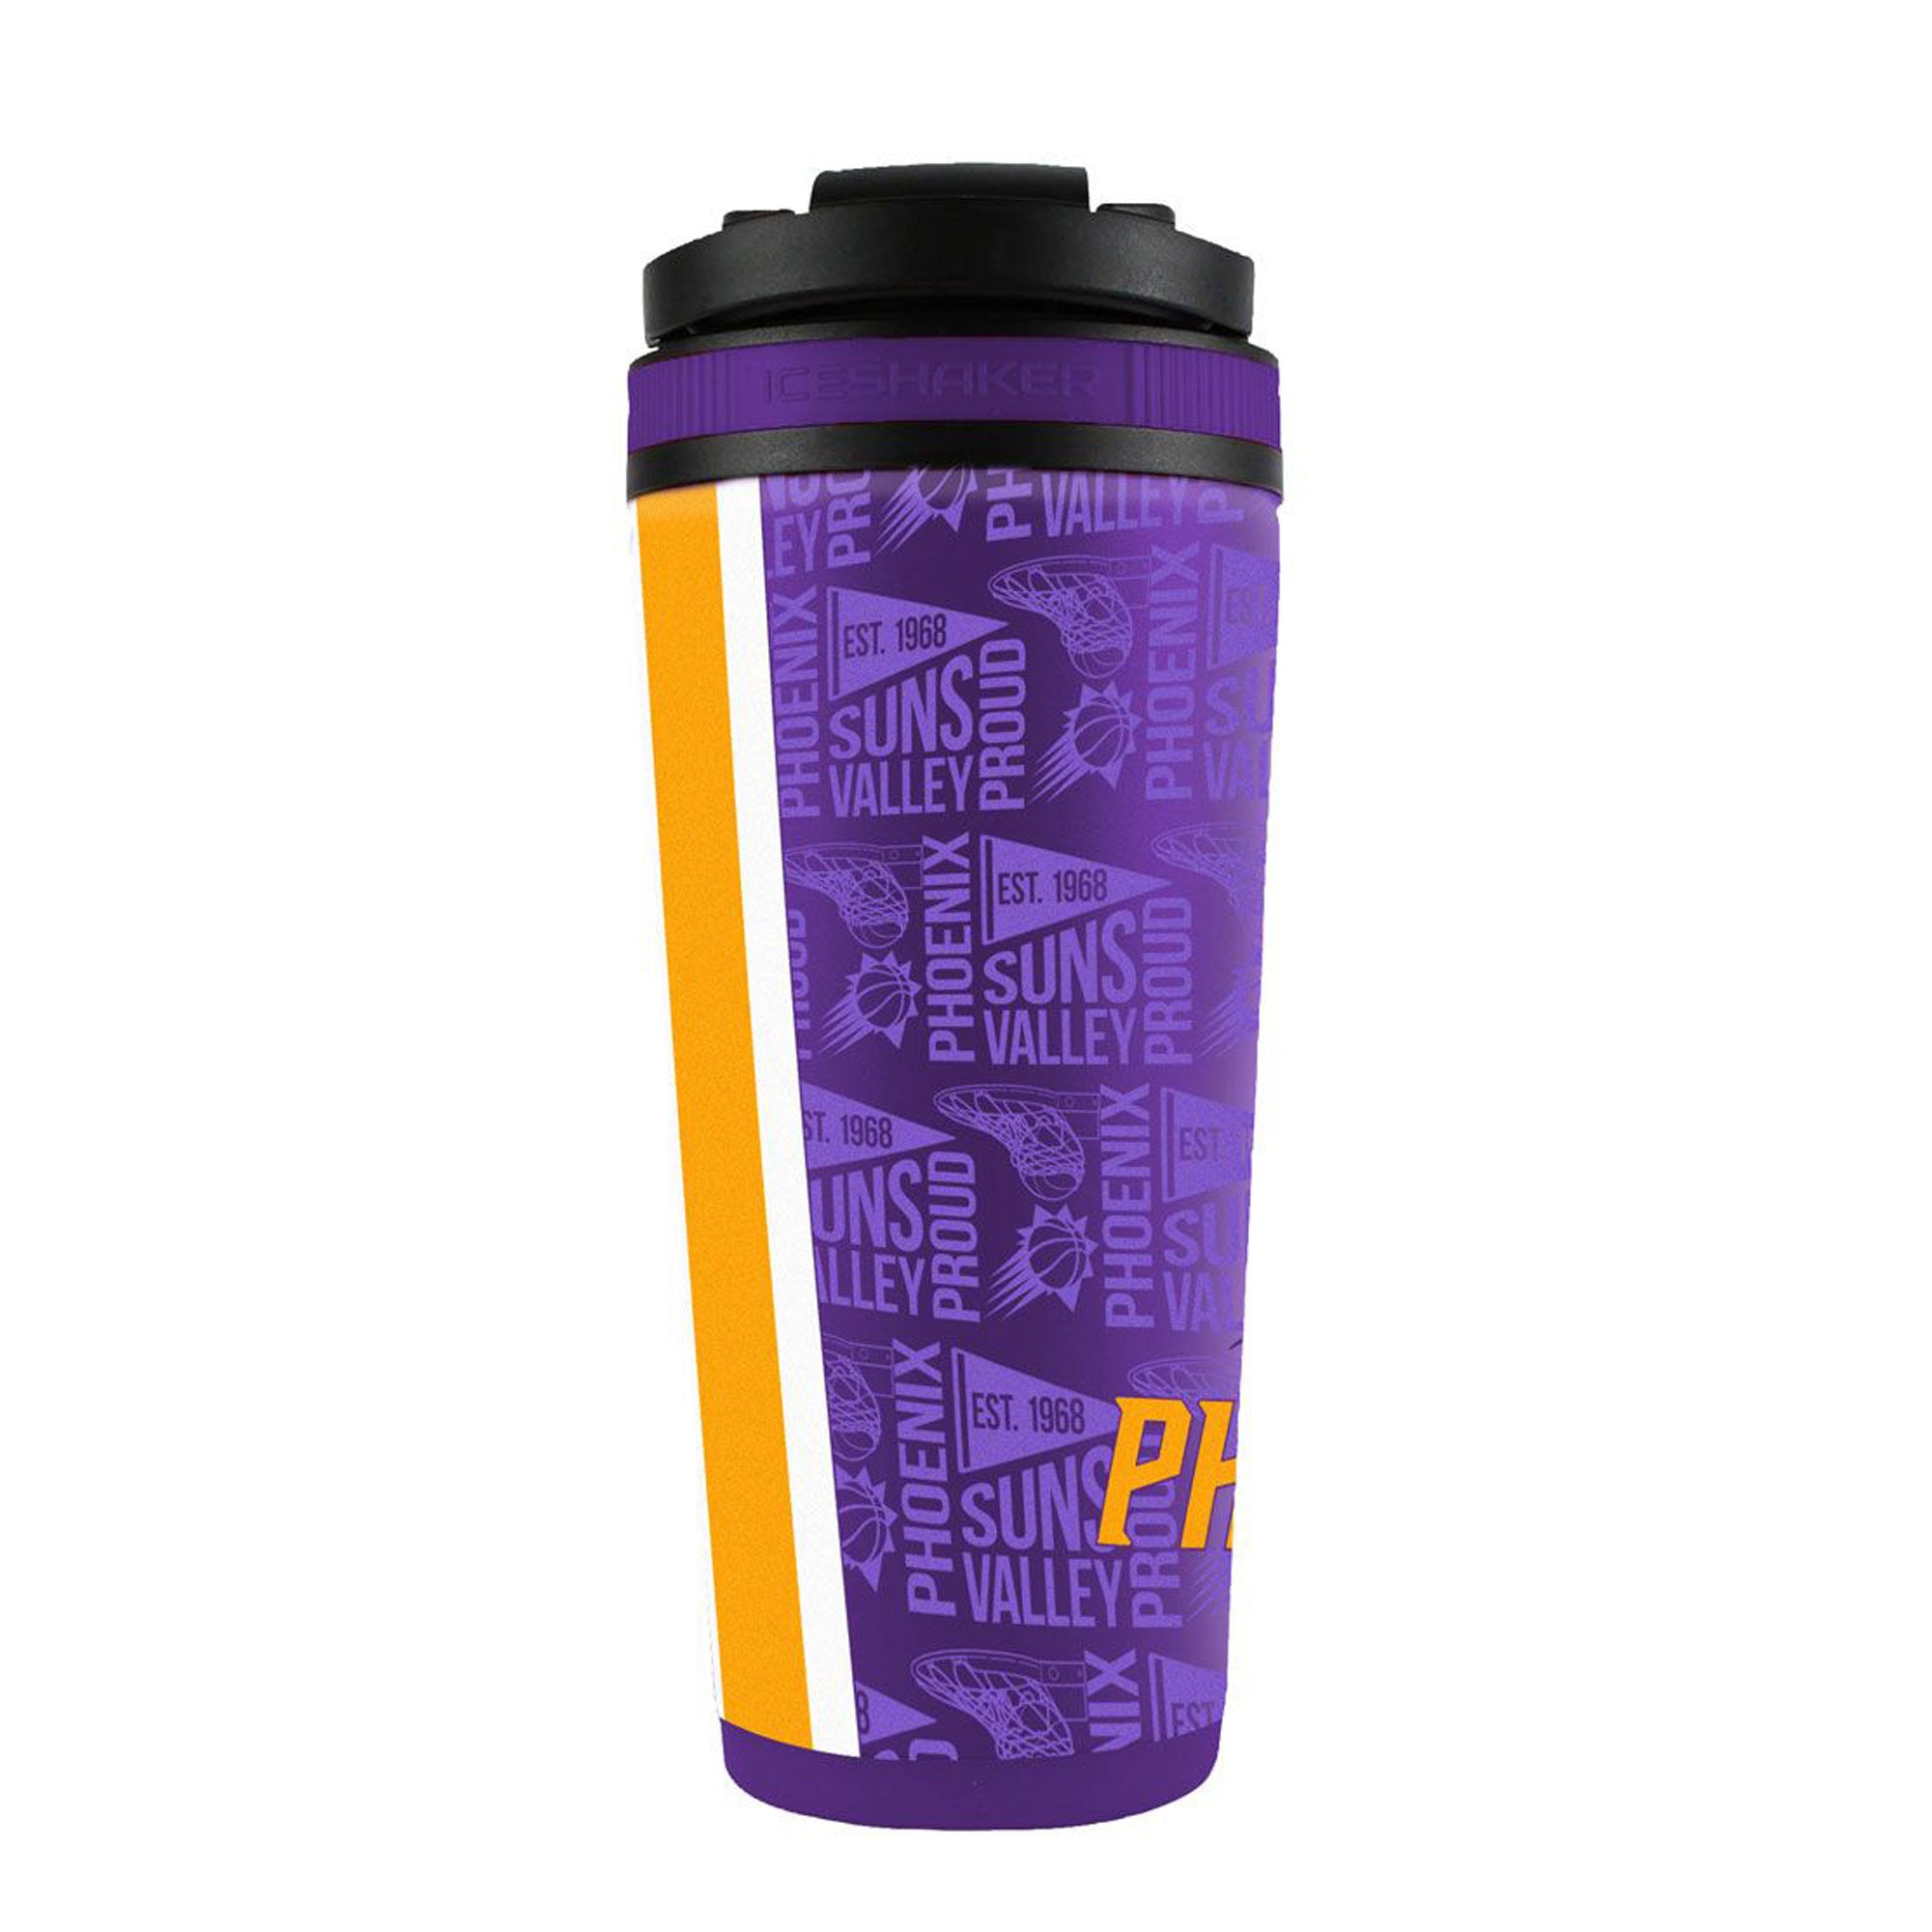 Officially Licensed Phoenix Suns 4D Ice Shaker